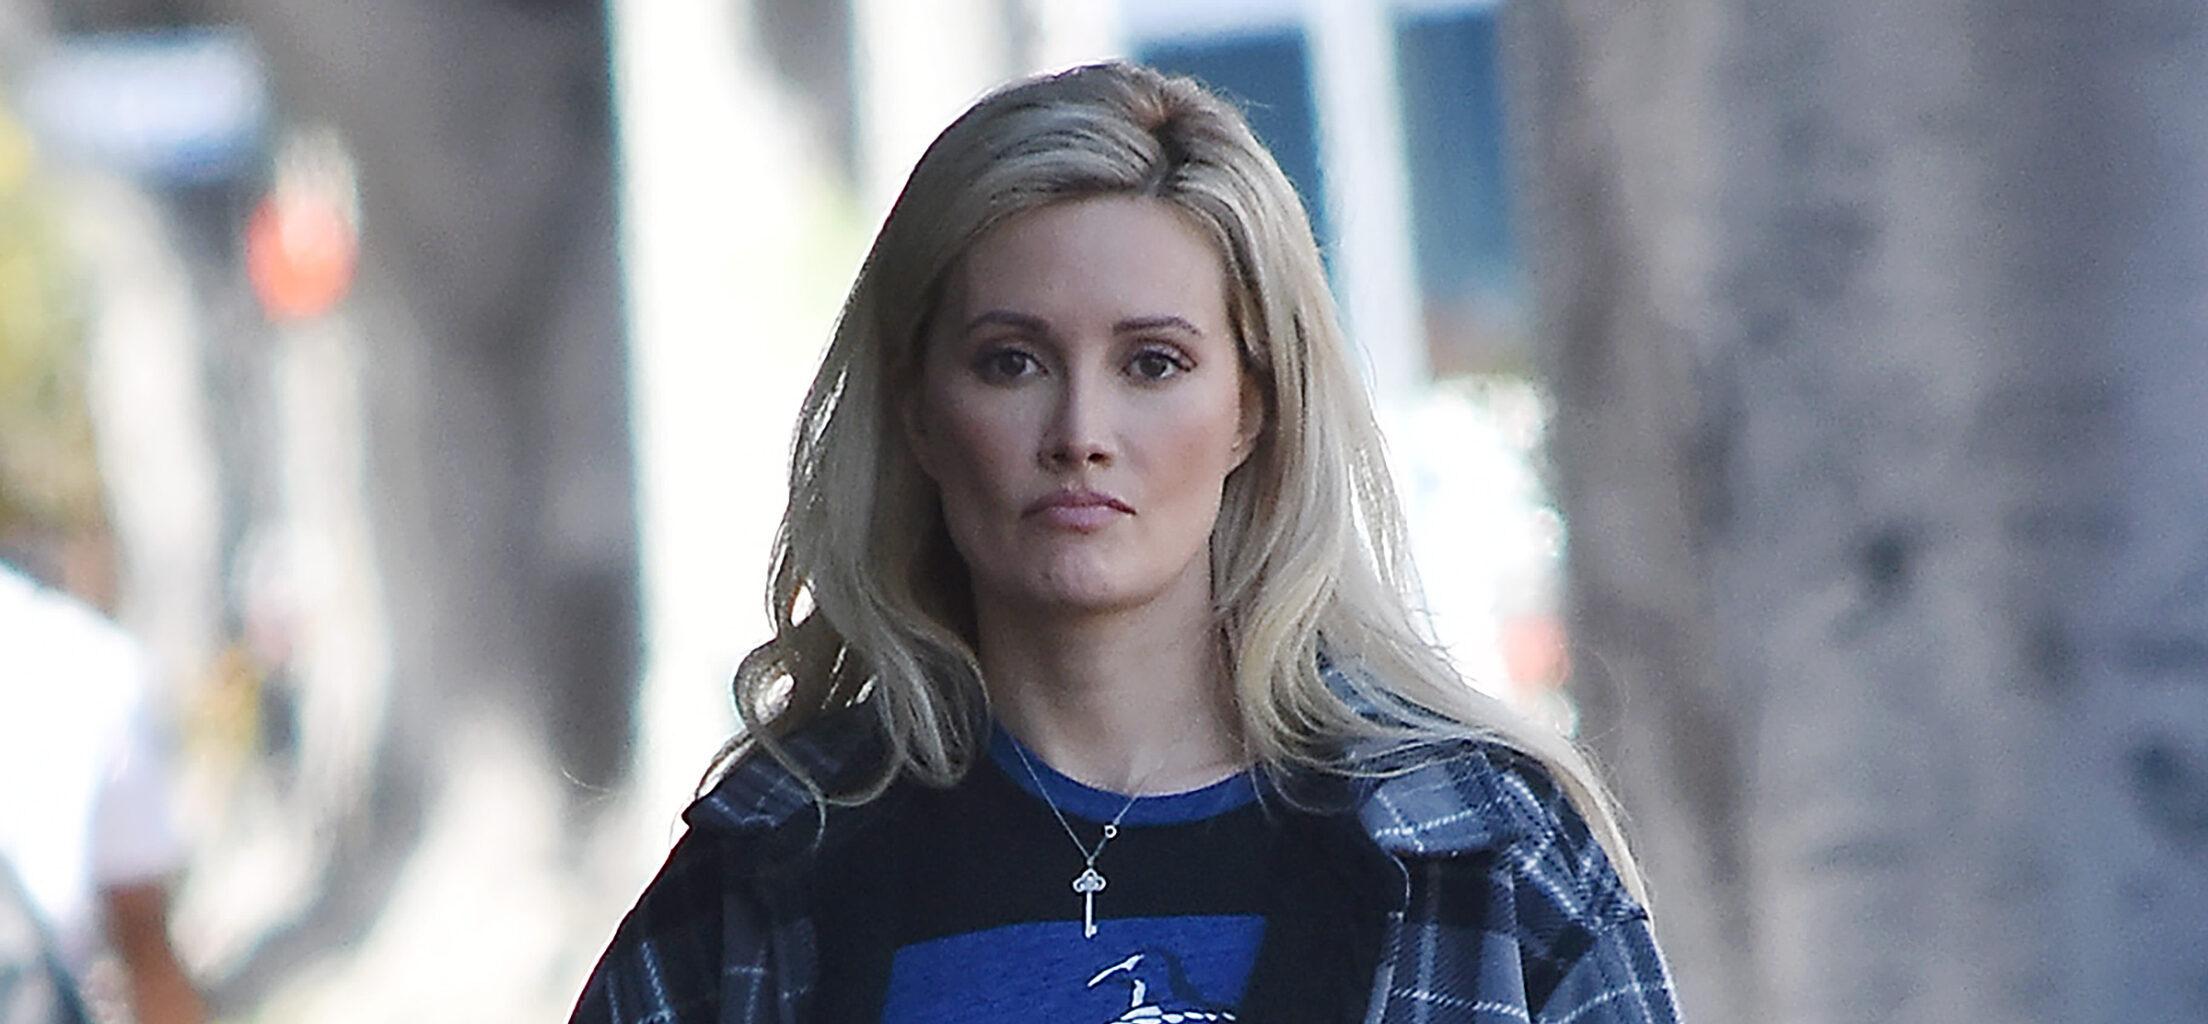 Holly Madison Says Mold Of Her ‘Lady Parts’ Was Purposely Exposed On ‘The Girls Next Door’